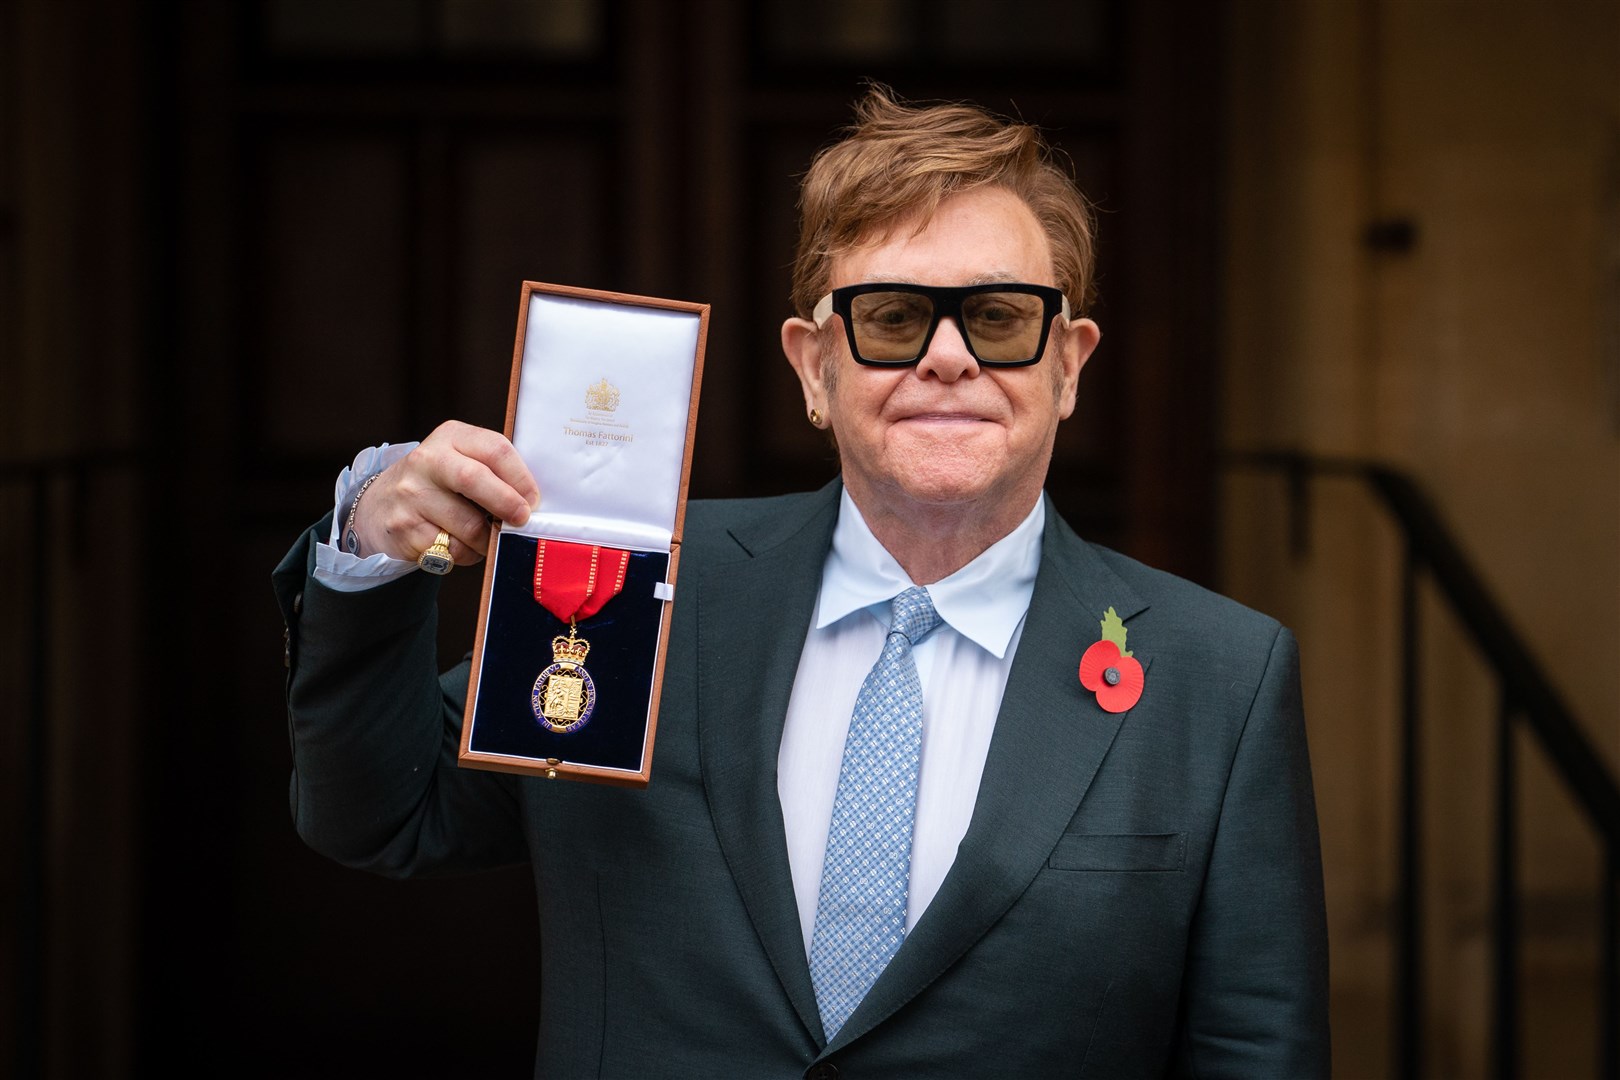 Sir Elton John in 2021 after being invested as a member of the Order of the Companions of Honour for services to music and to charity (Dominic Lipinski/PA)